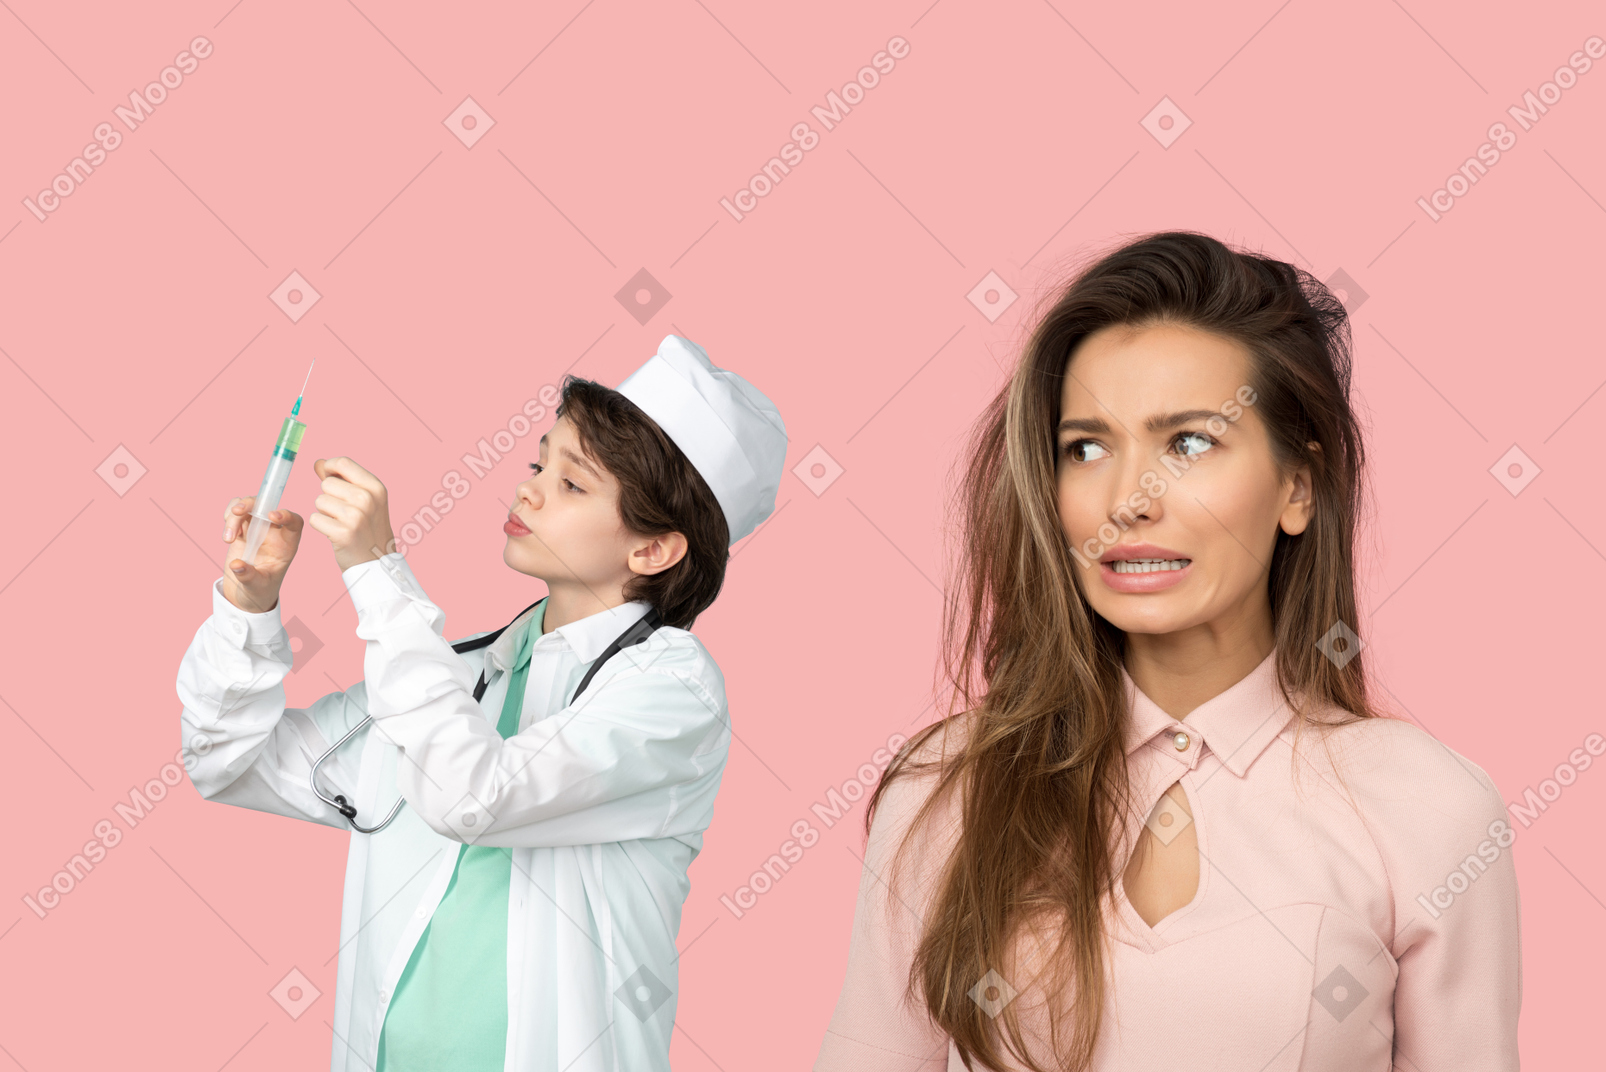 Attractive woman terrified of a kid doctor preparing an injection